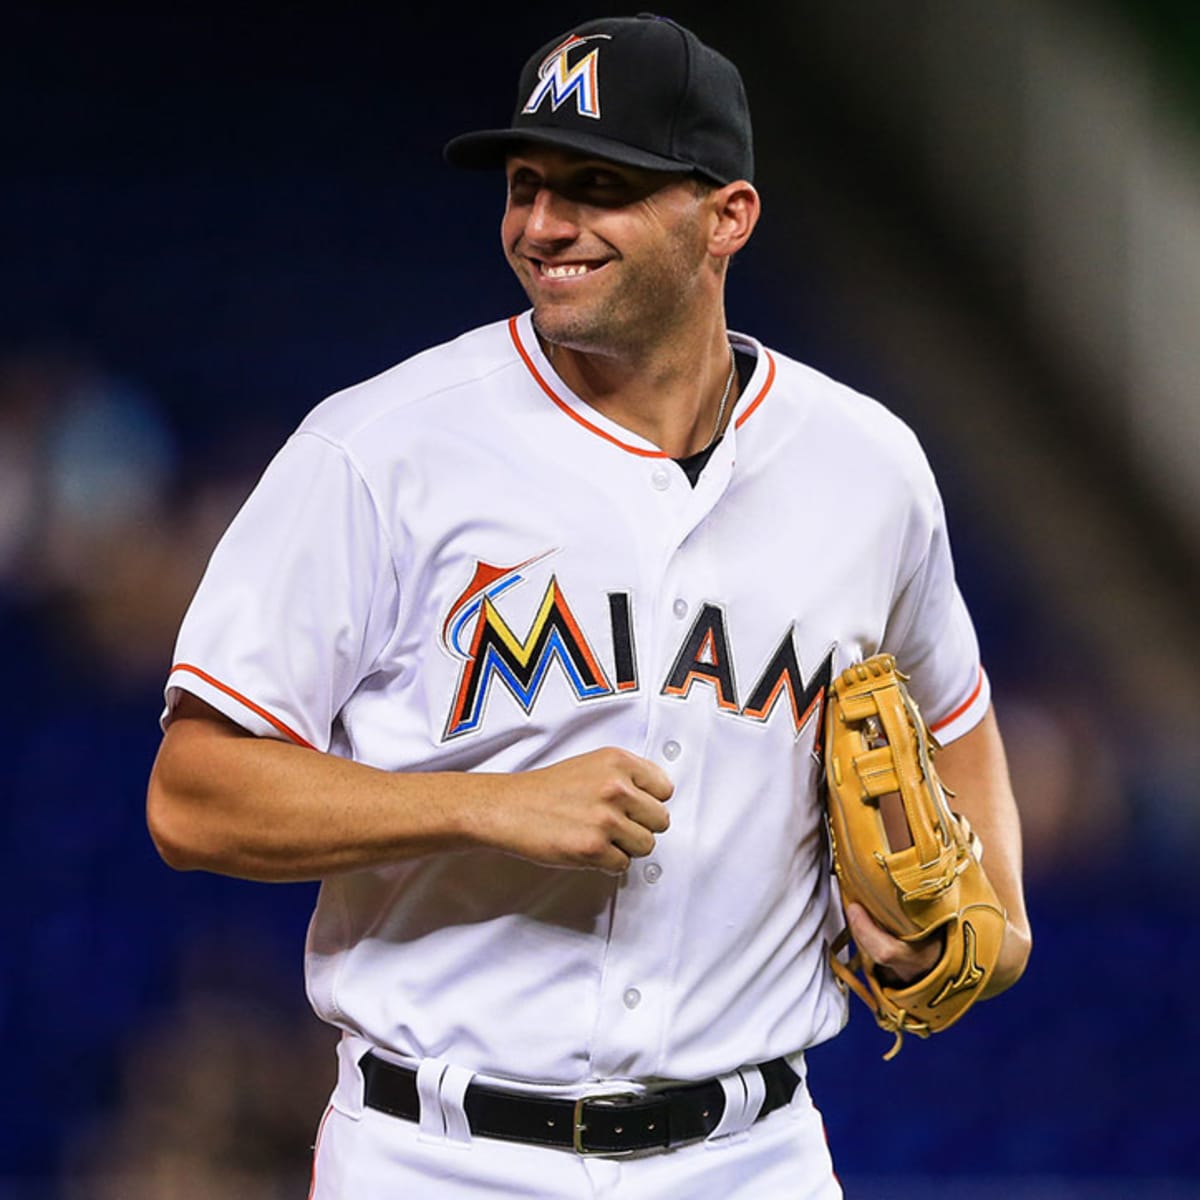 VIDEO: Jeff Francoeur's teammates prank him into thinking pitcher is deaf –  New York Daily News